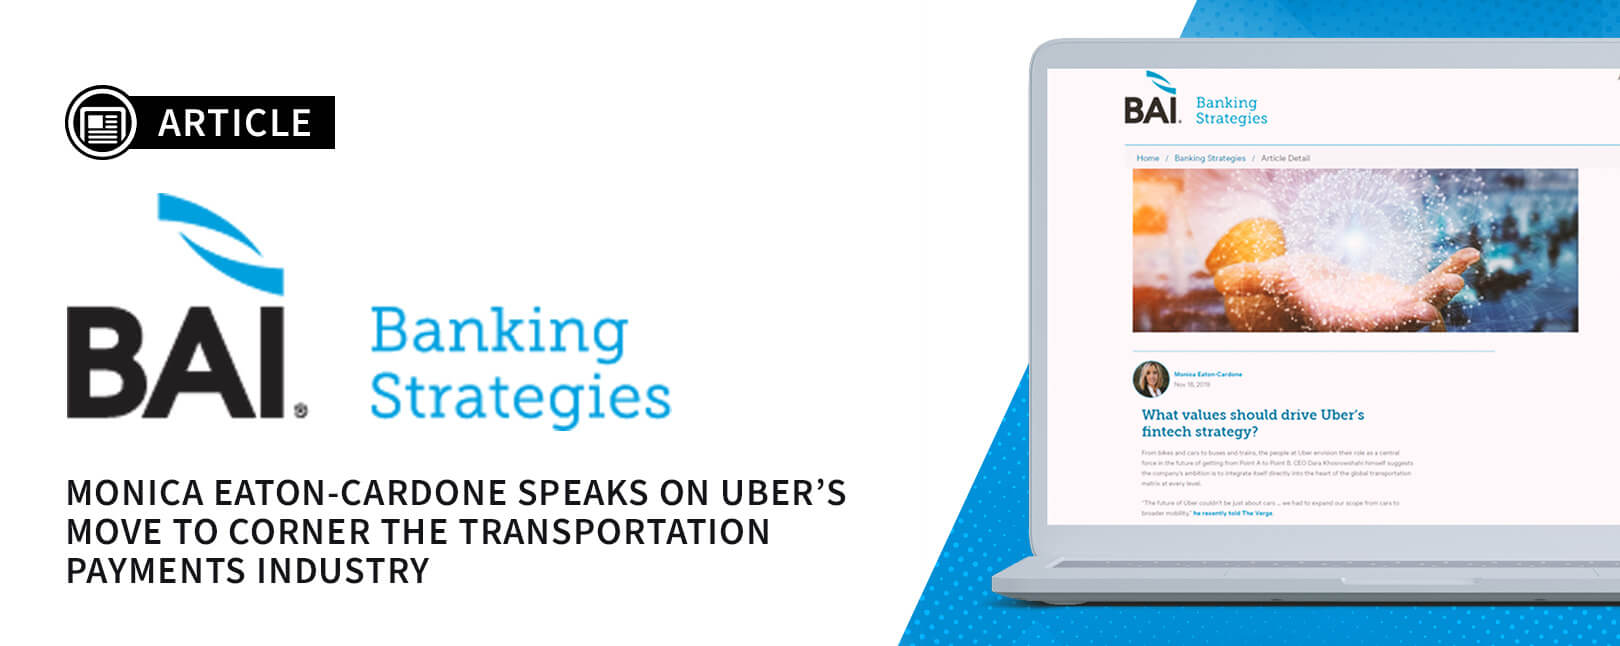 What Values Should Drive Uber’s Fintech Strategy?